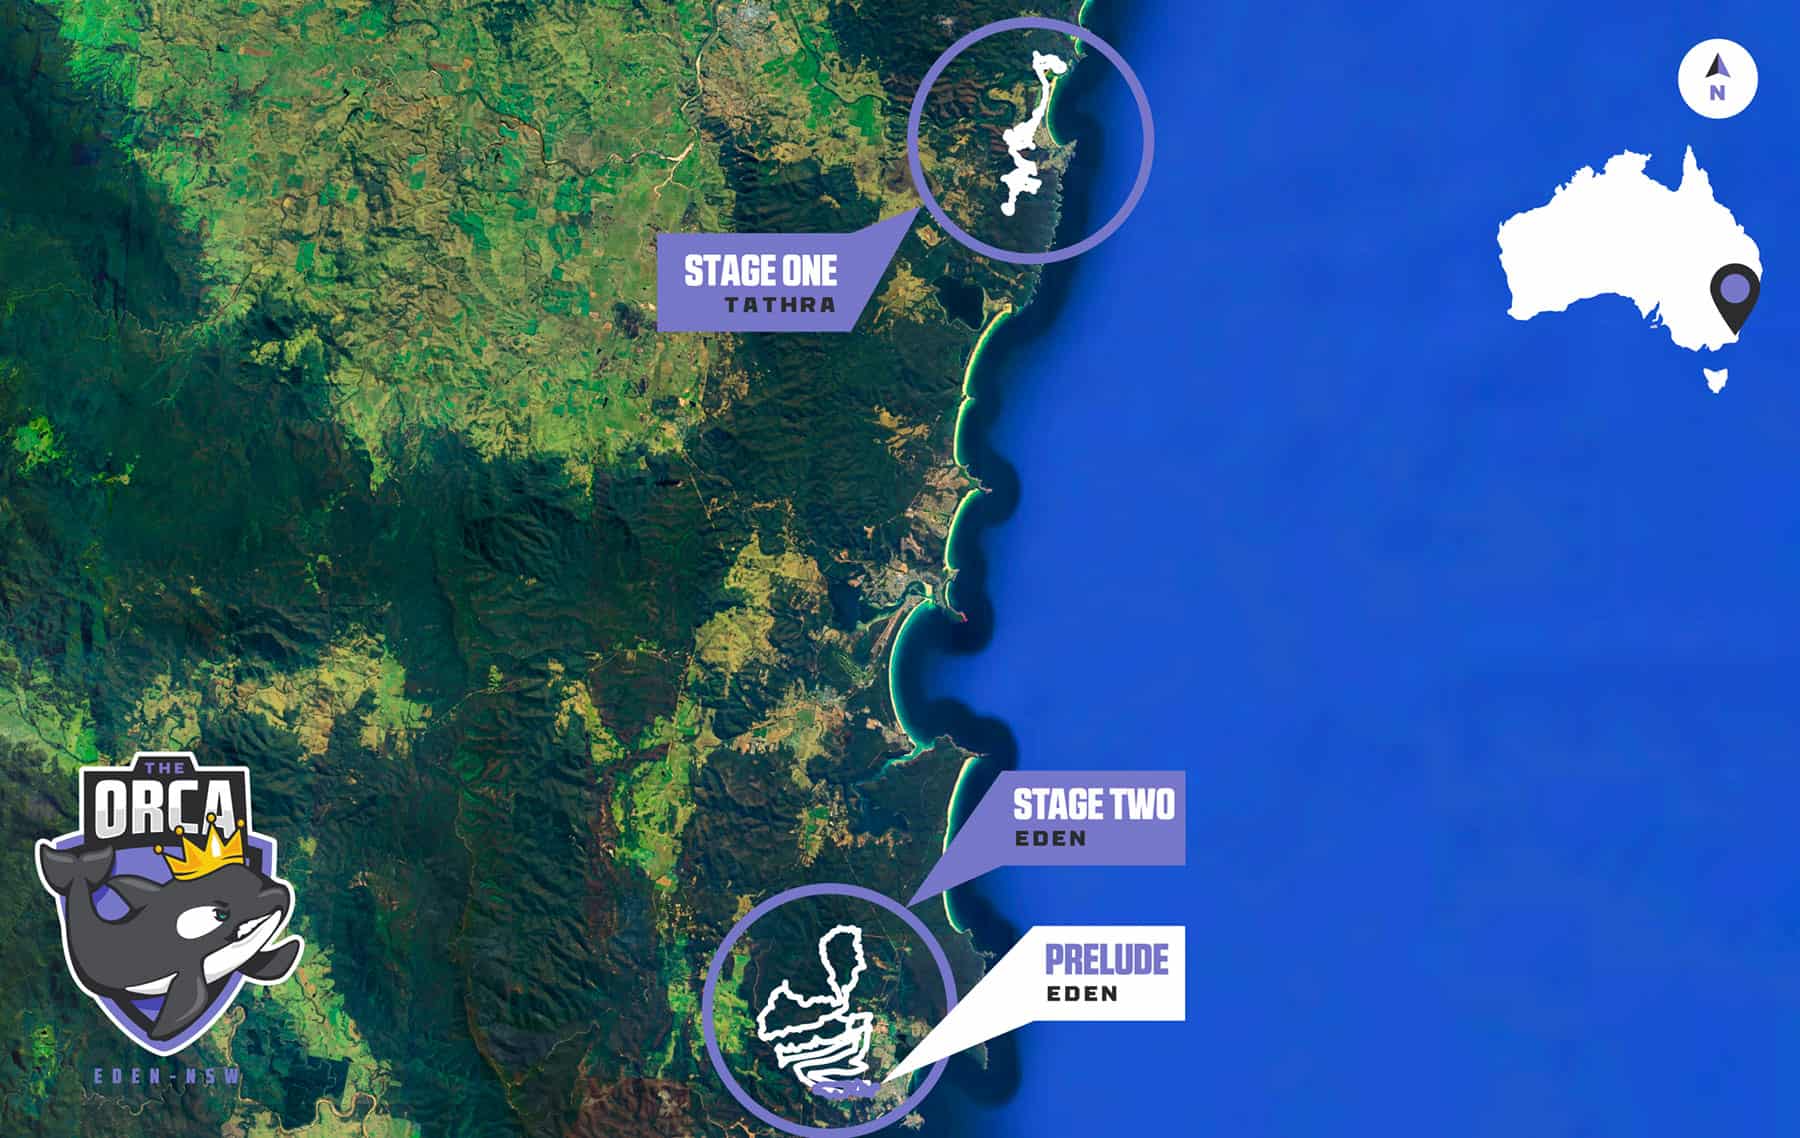 Overview Map for The Orca MTB Stage Race in Eden NSW as part of the Quad Crown MTB Series